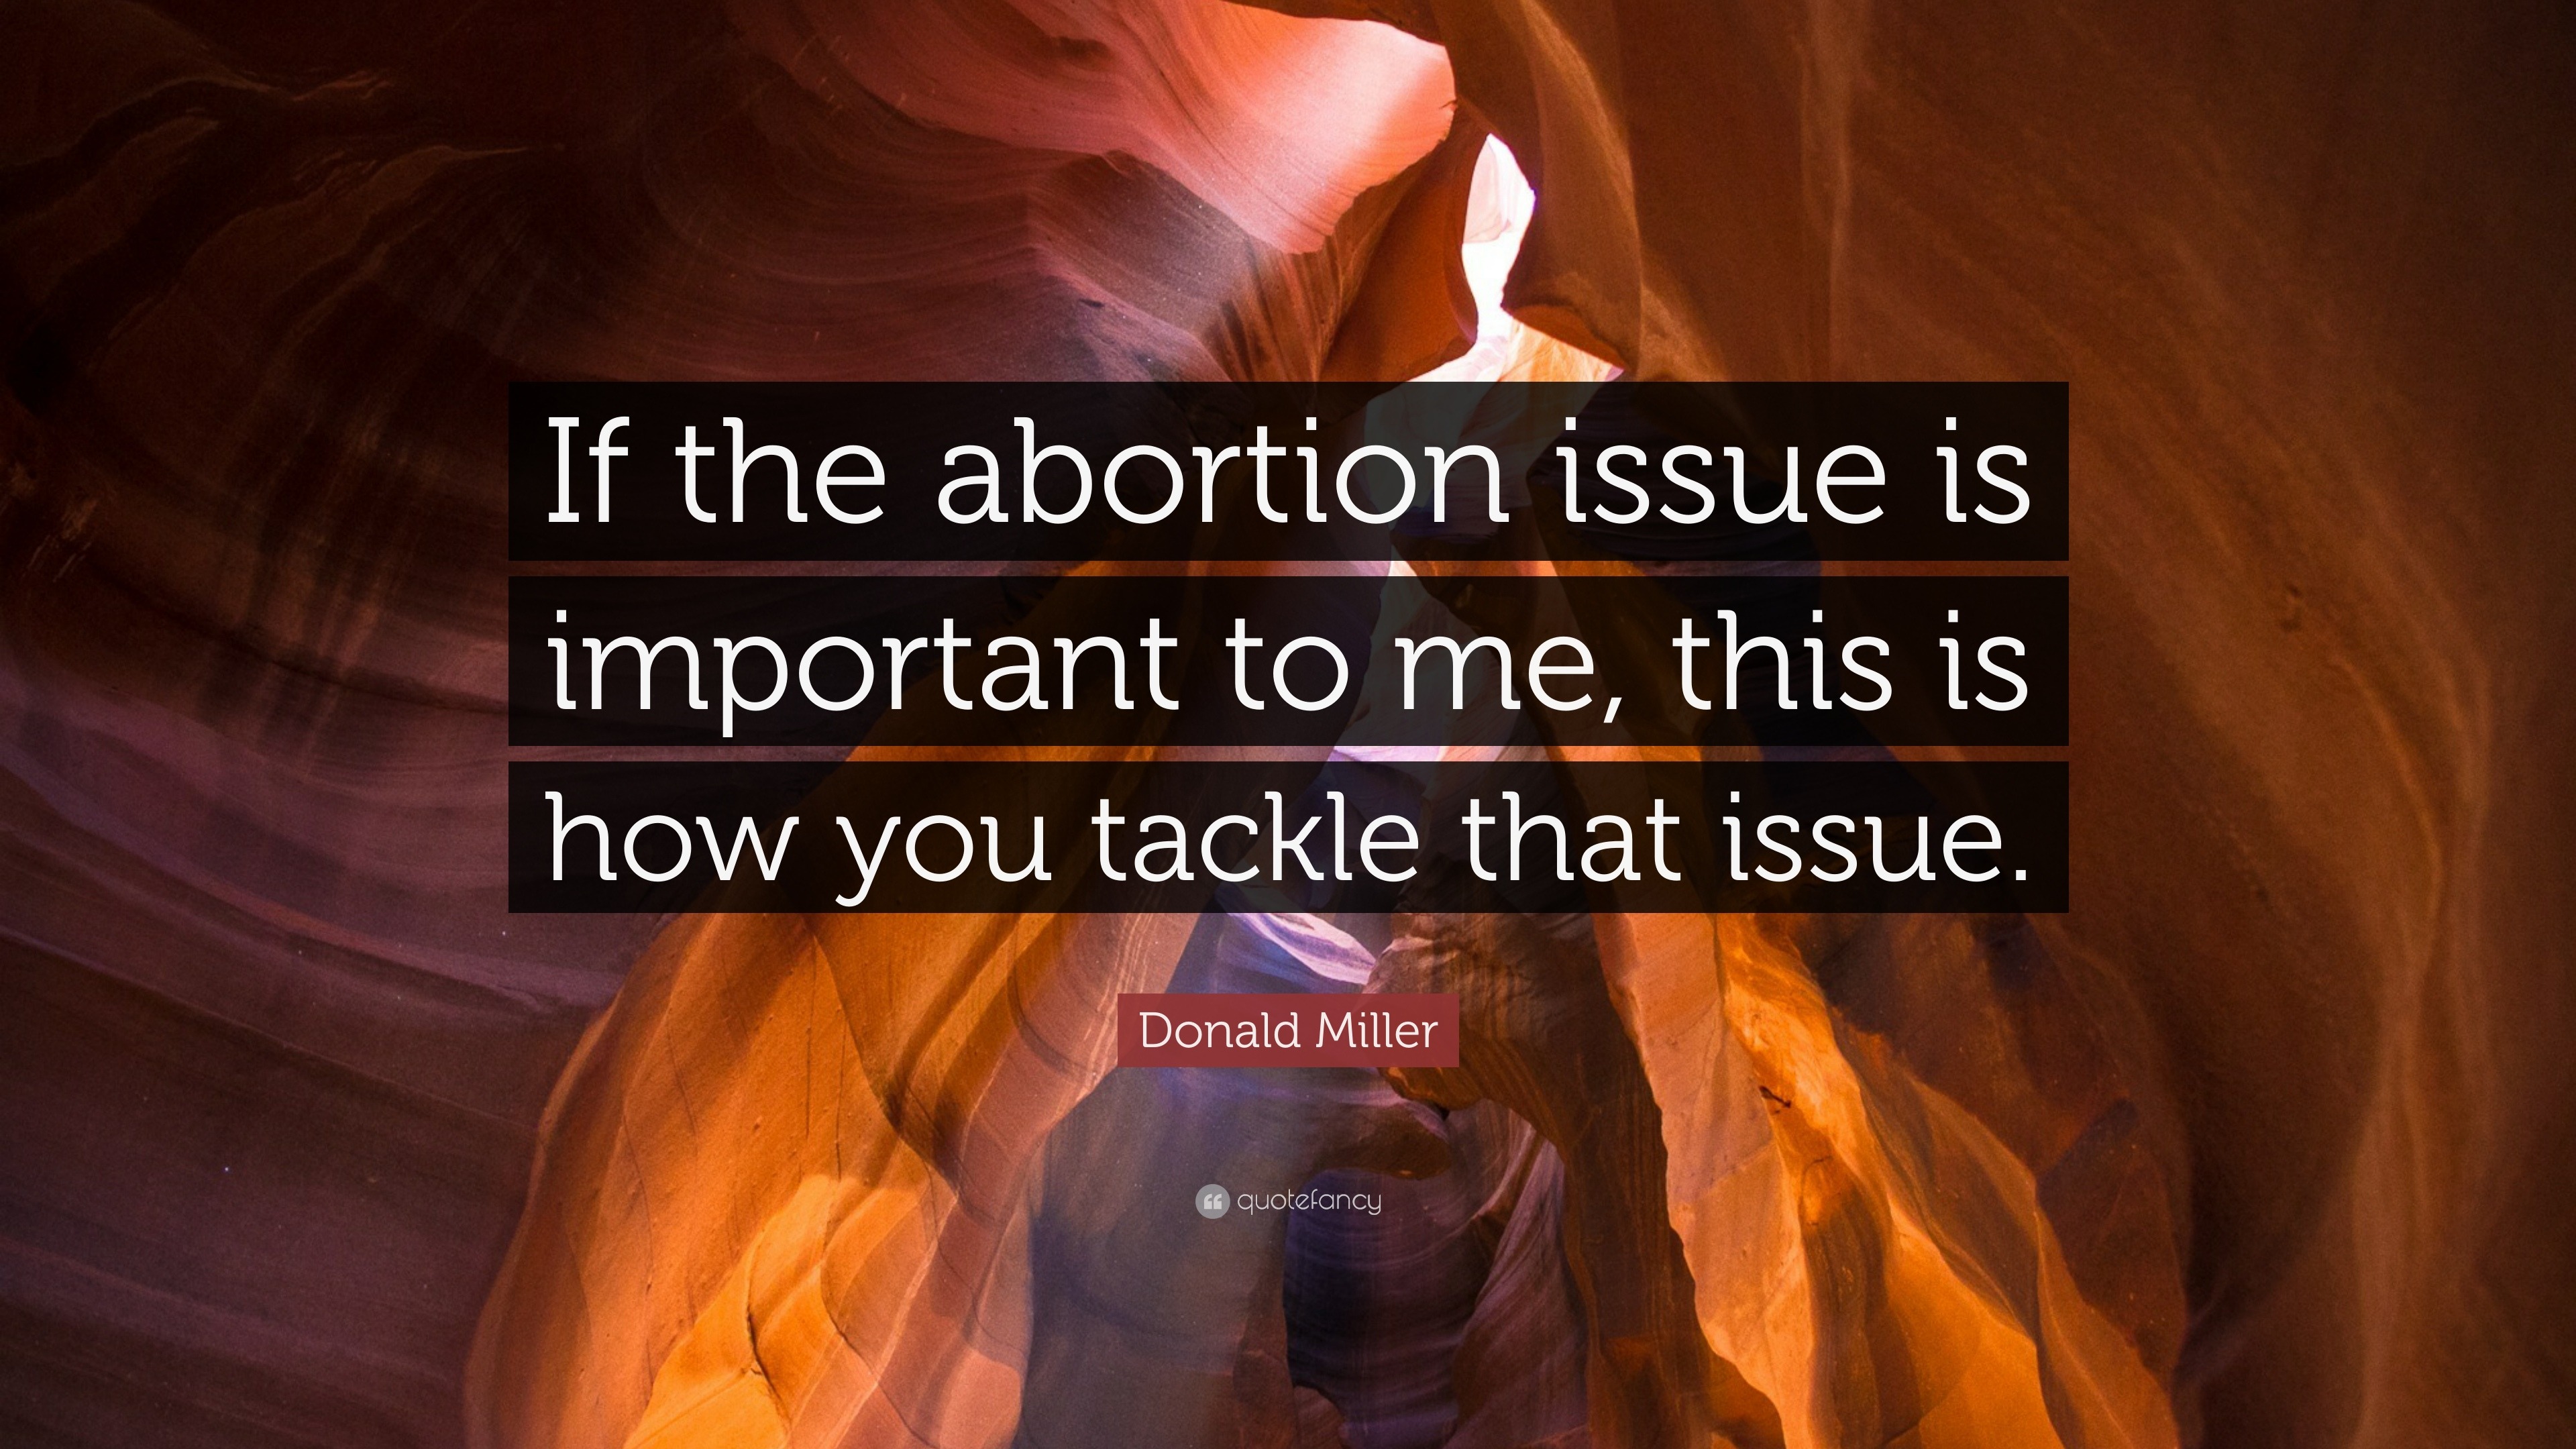 Donald Miller Quote: "If the abortion issue is important to me, this is how you tackle that ...